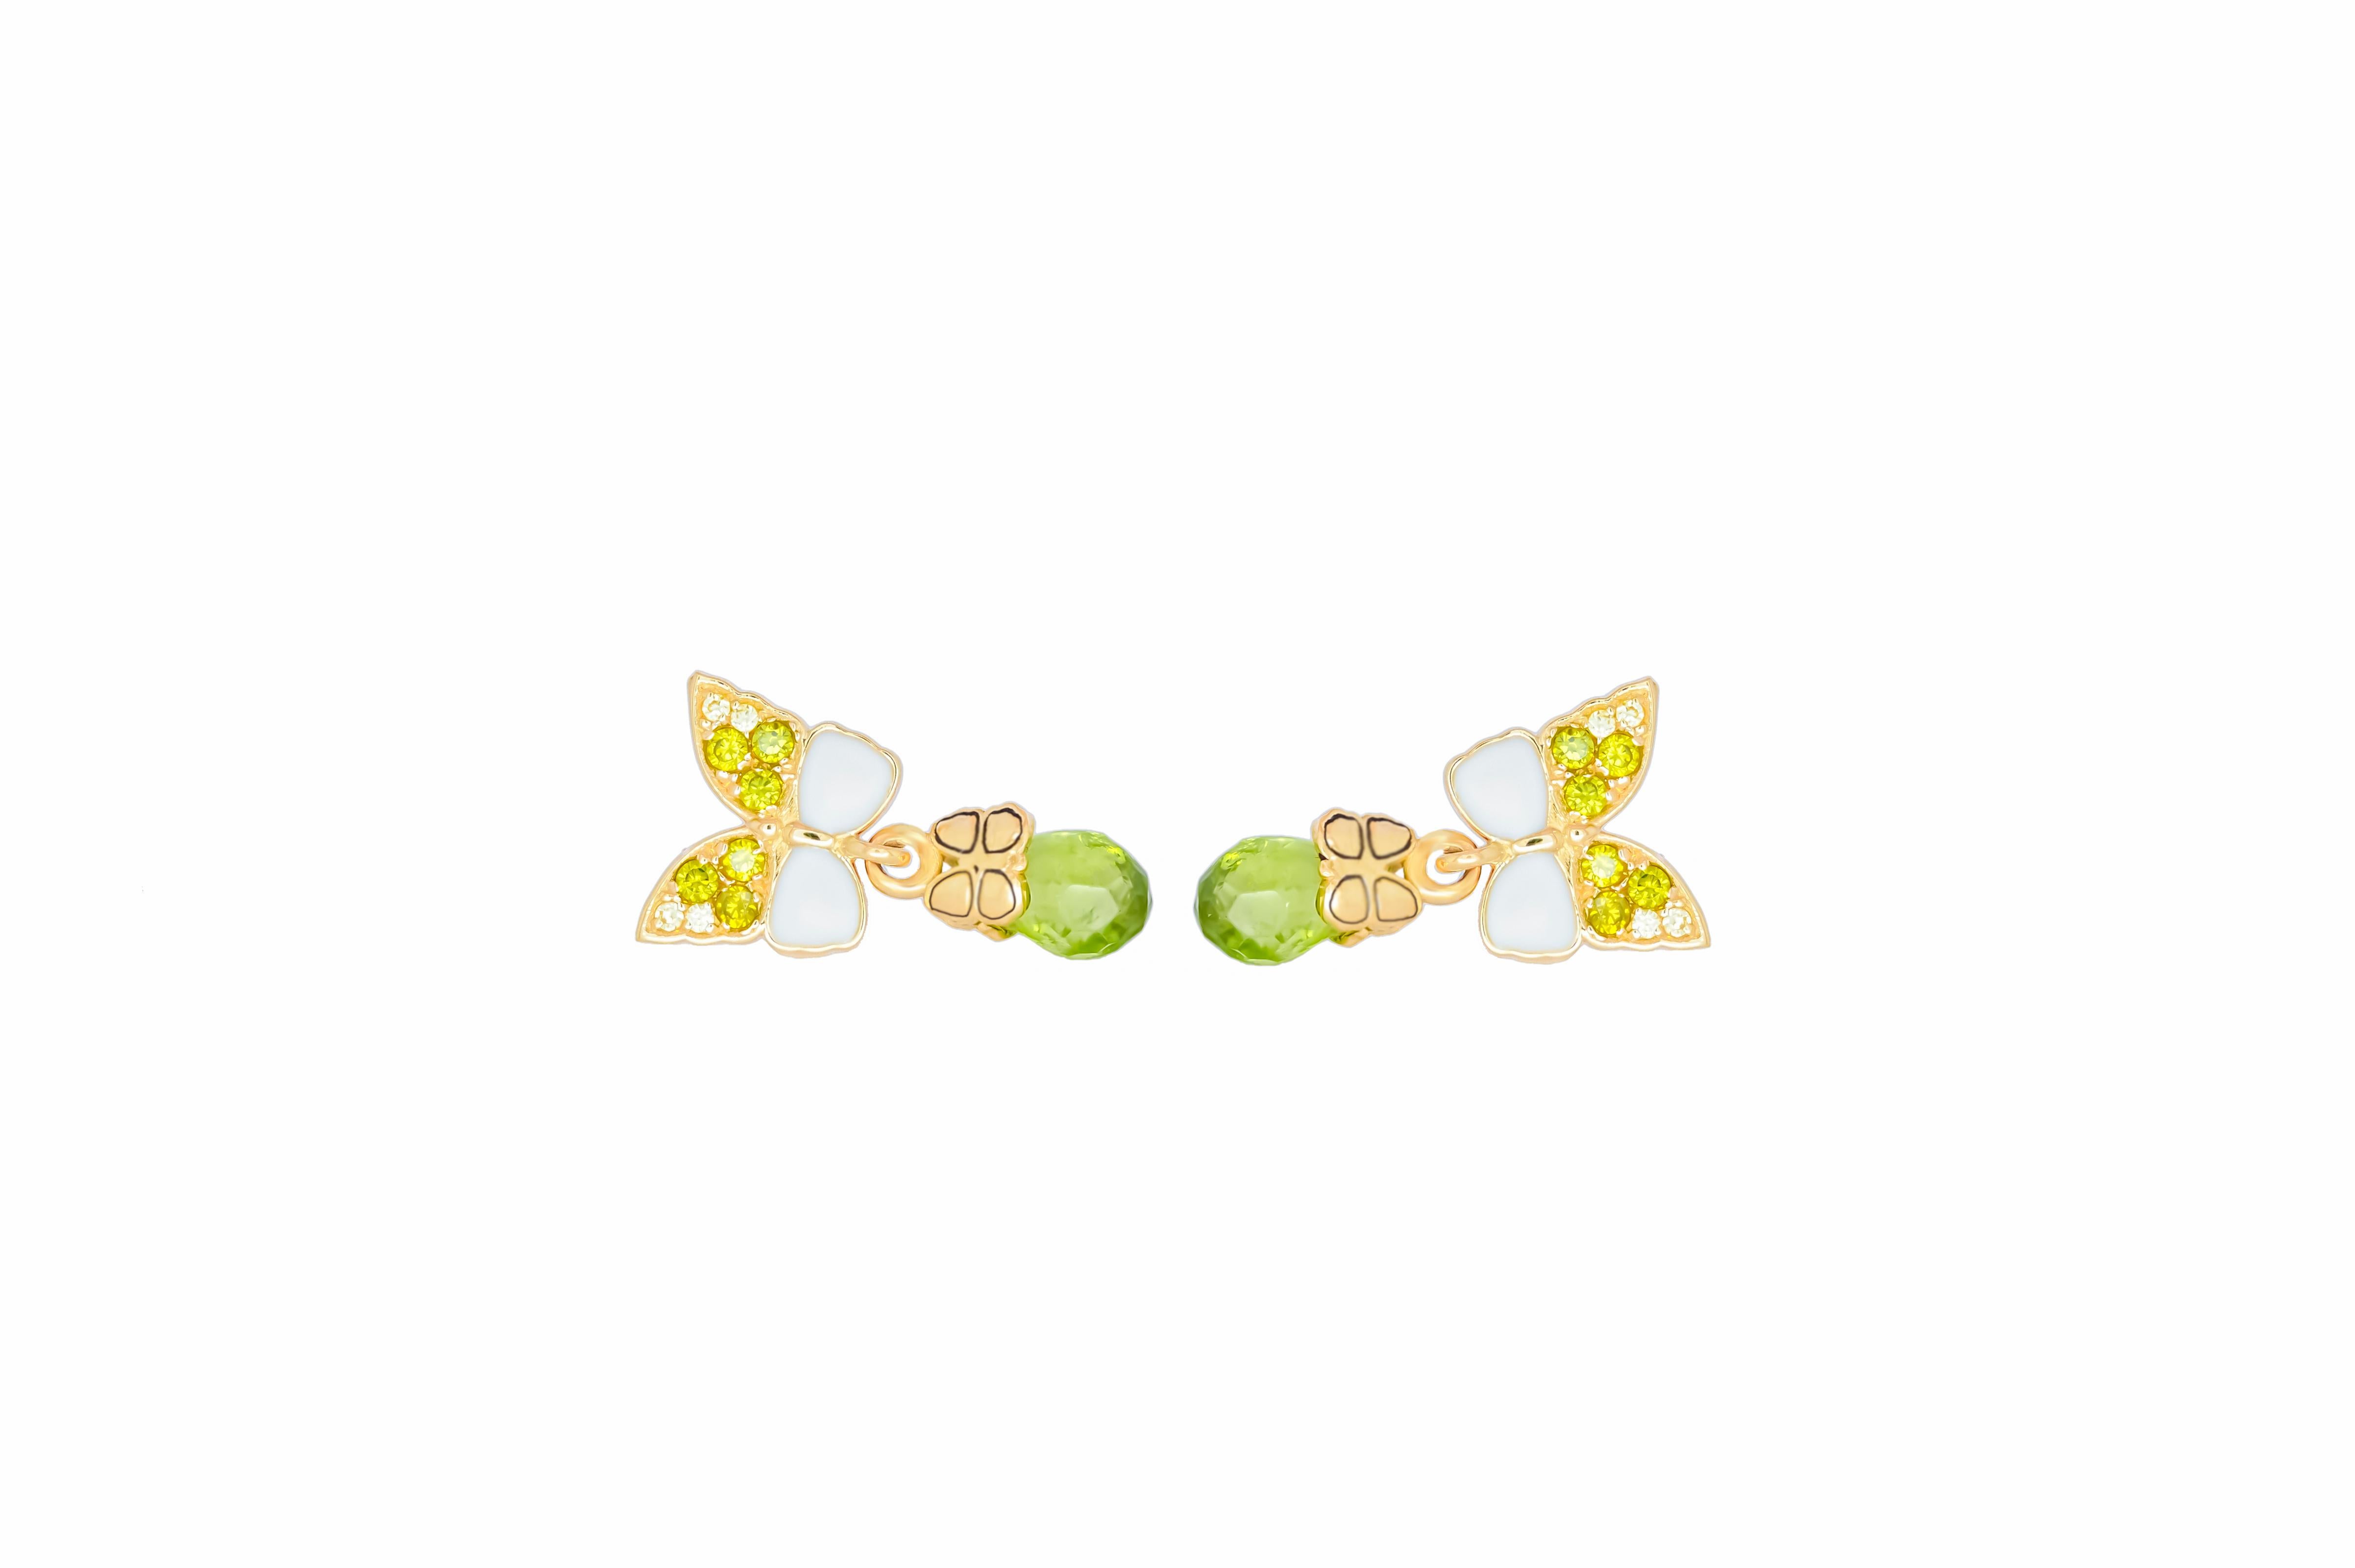 Butterfly 14k  gold earrings with peridot briolettes. 
Peridot Dangle Earrings for Women. Peridot Drop Earrings. Beautiful earrings for everyday wearing. 

Metal: 14 karat gold
Weight: 3  g.
Size:   19x10
Peridots 2 pieces - apple green color,